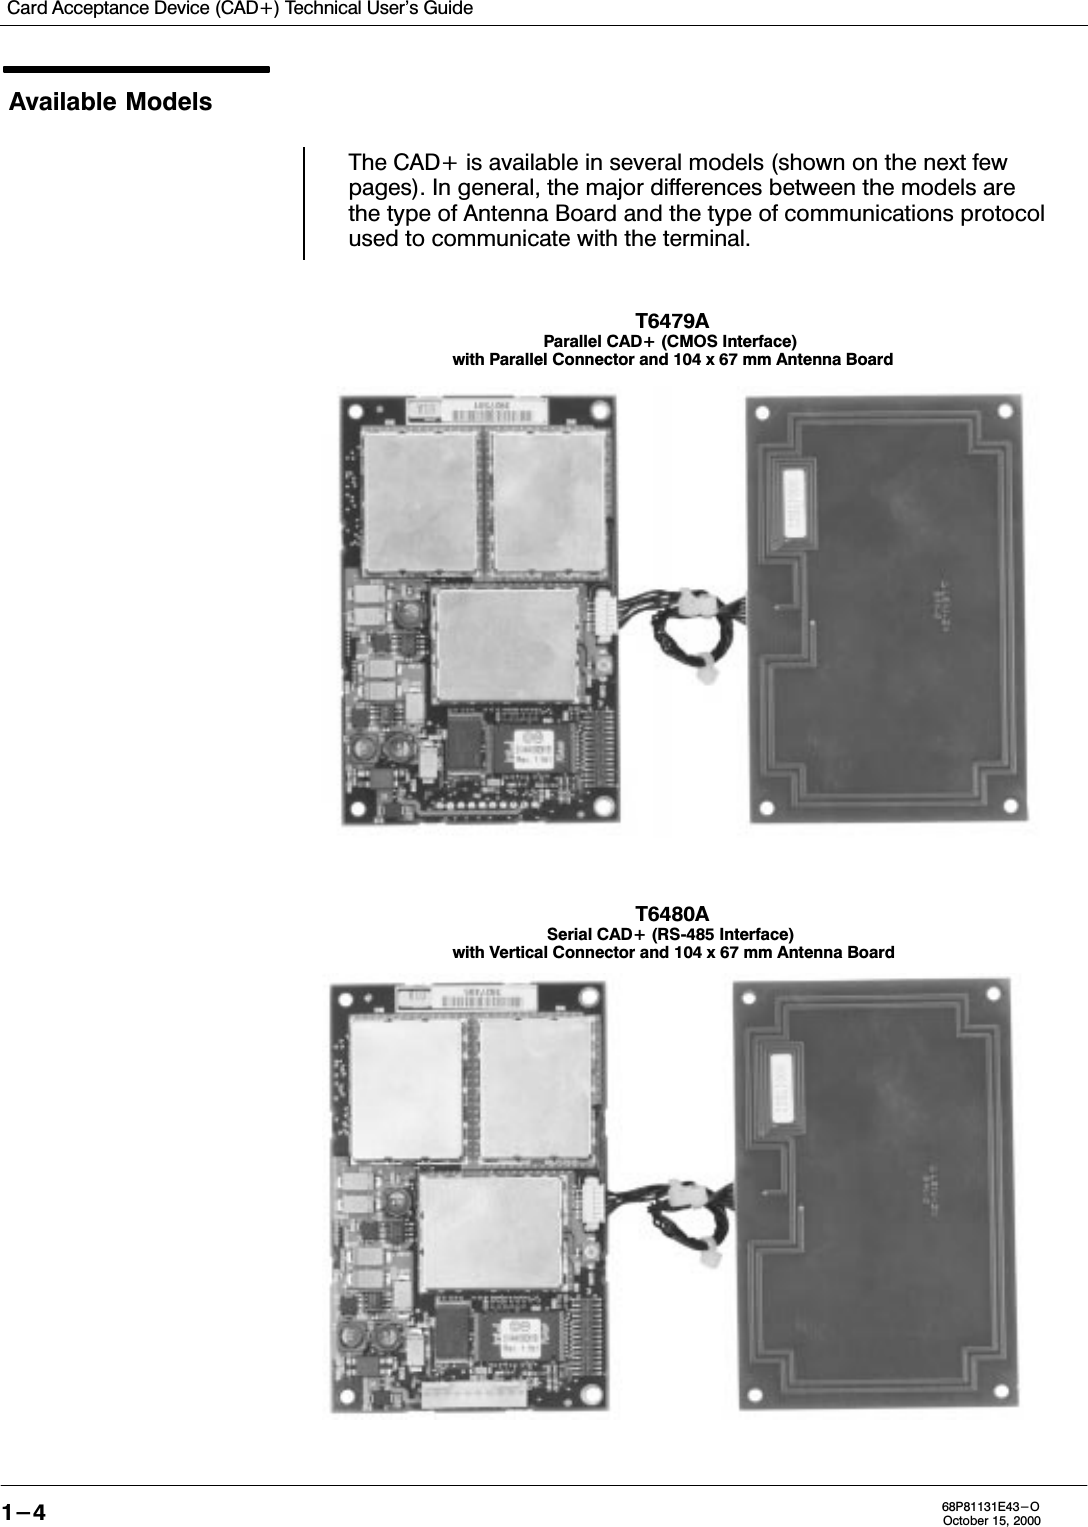 Card Acceptance Device (CAD+) Technical User&apos;s Guide1-4 68P81131E43-OOctober 15, 2000Available ModelsThe CAD+ is available in several models (shown on the next fewpages). In general, the major differences between the models arethe type of Antenna Board and the type of communications protocolused to communicate with the terminal.T6479AParallel CAD+ (CMOS Interface) with Parallel Connector and 104 x 67 mm Antenna BoardT6480ASerial CAD+ (RS485 Interface) with Vertical Connector and 104 x 67 mm Antenna Board